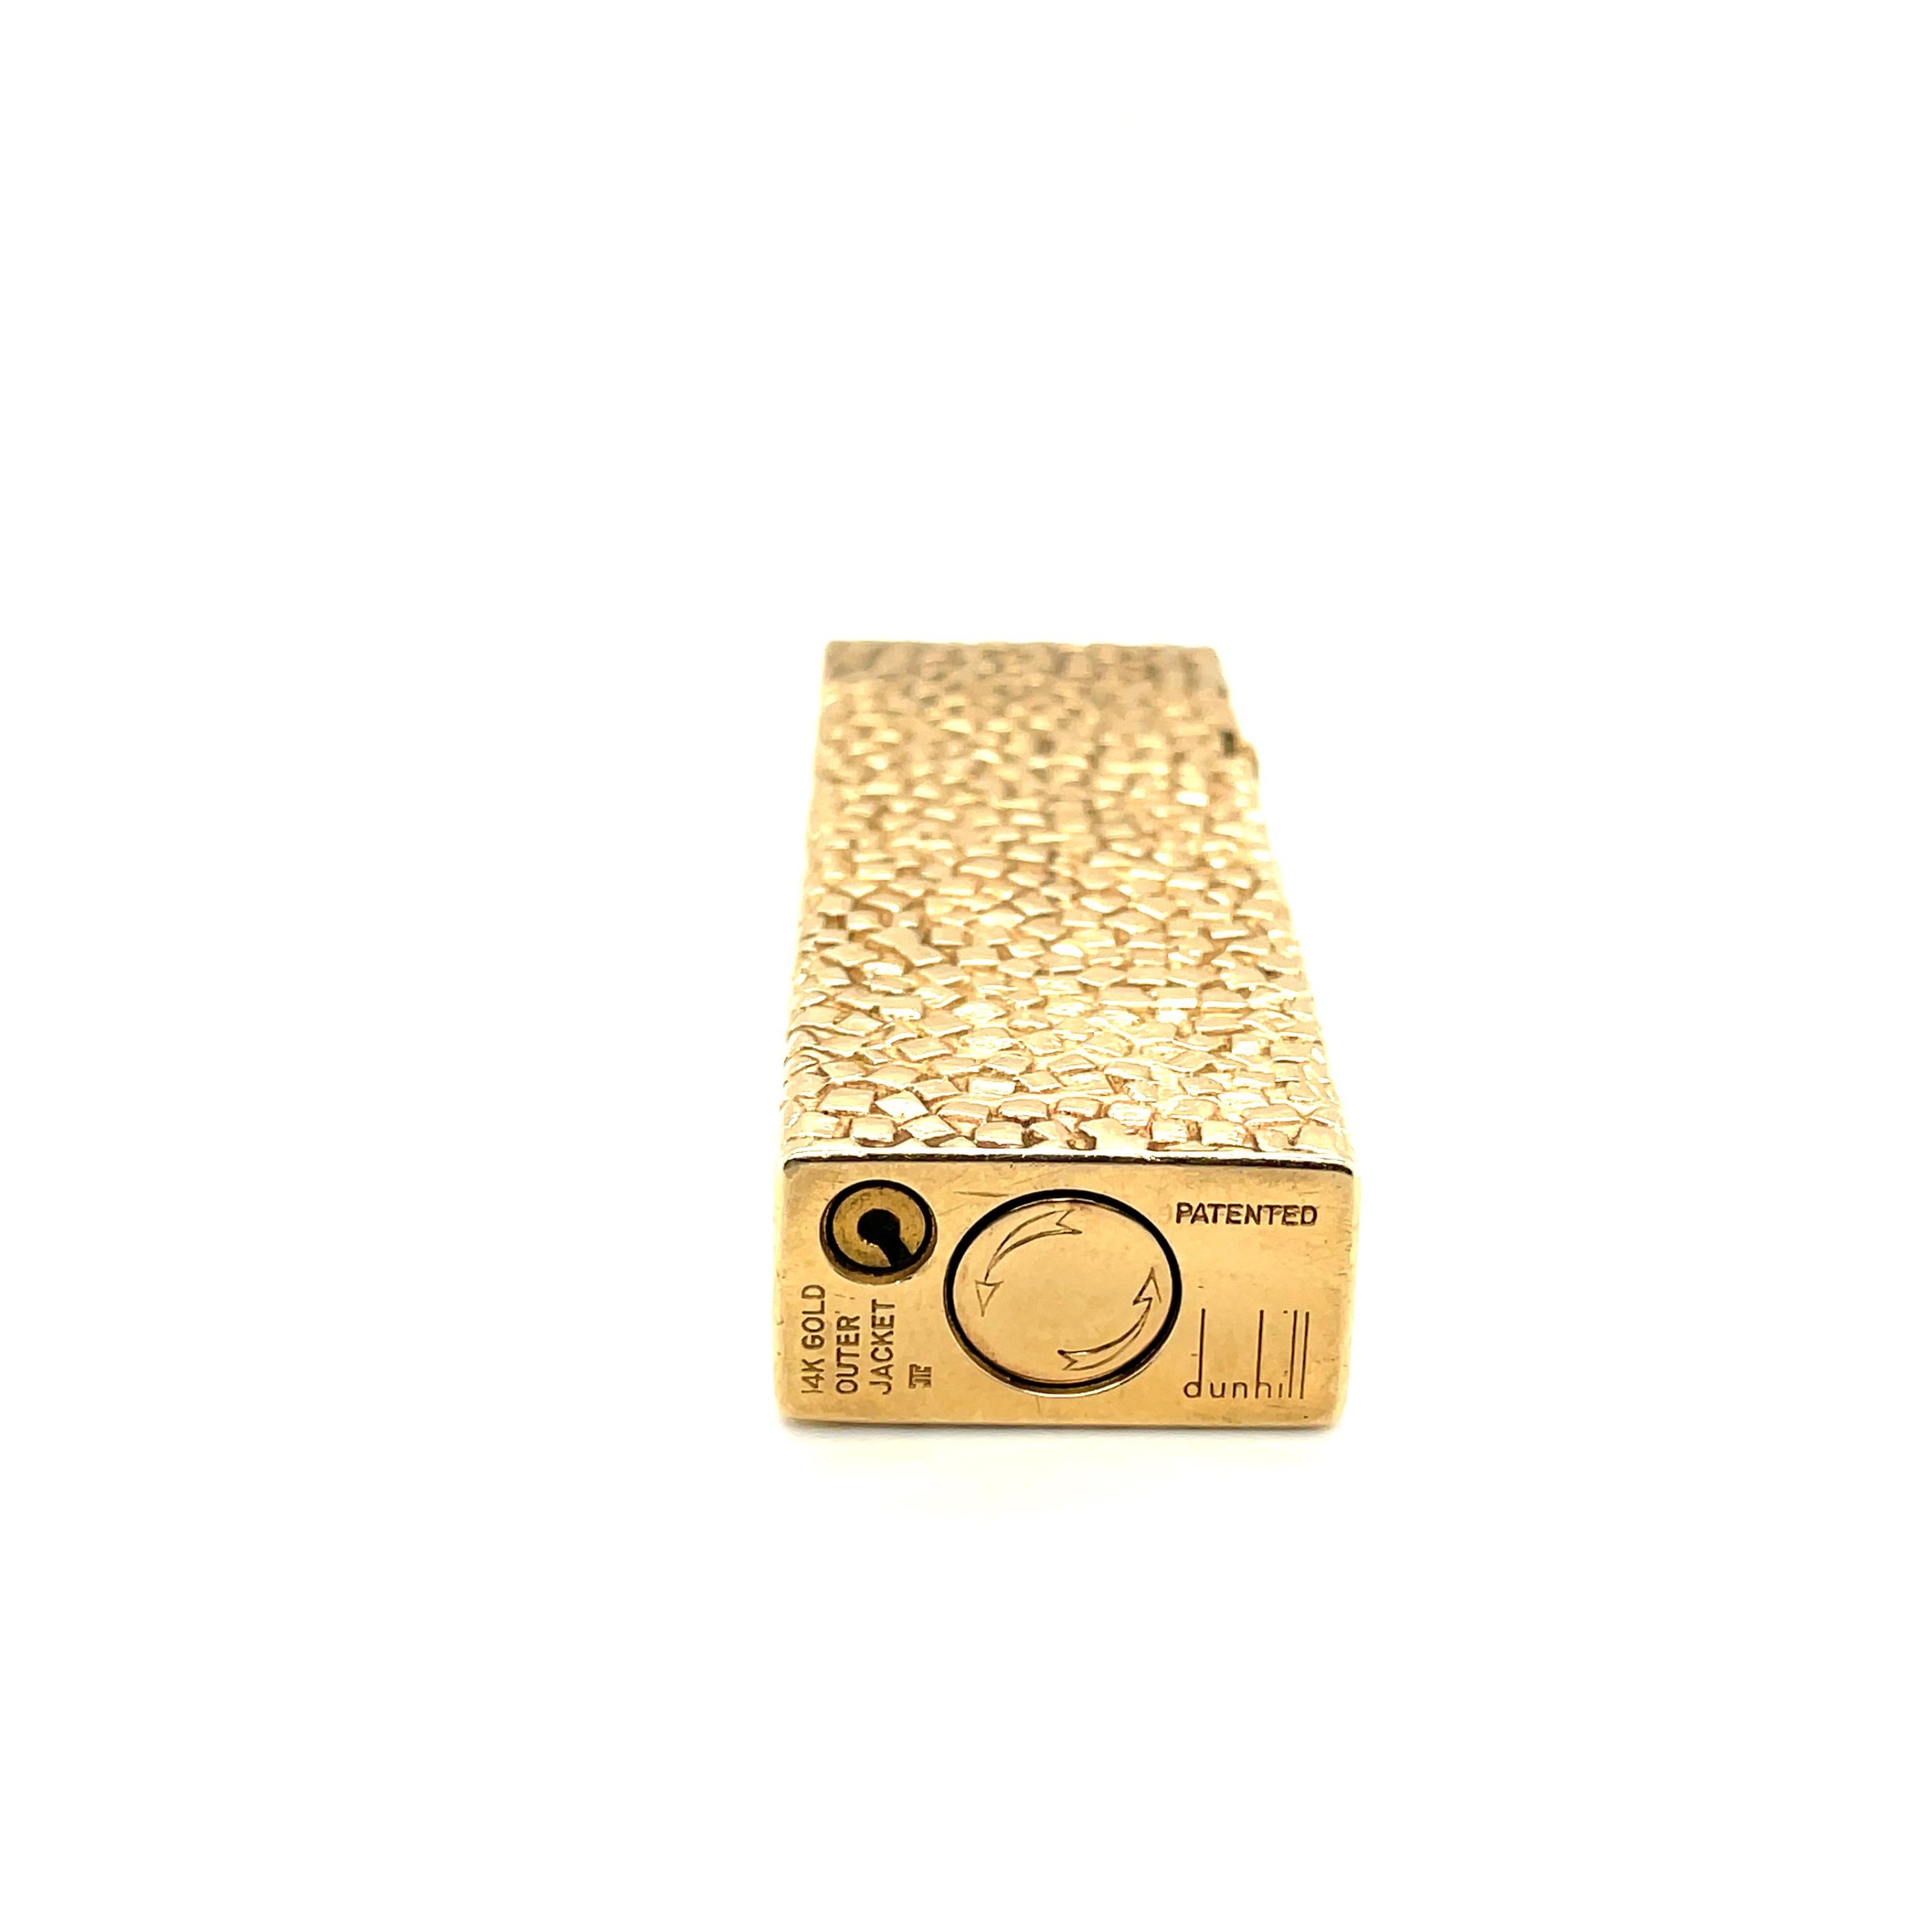 dunhill solid gold lighter